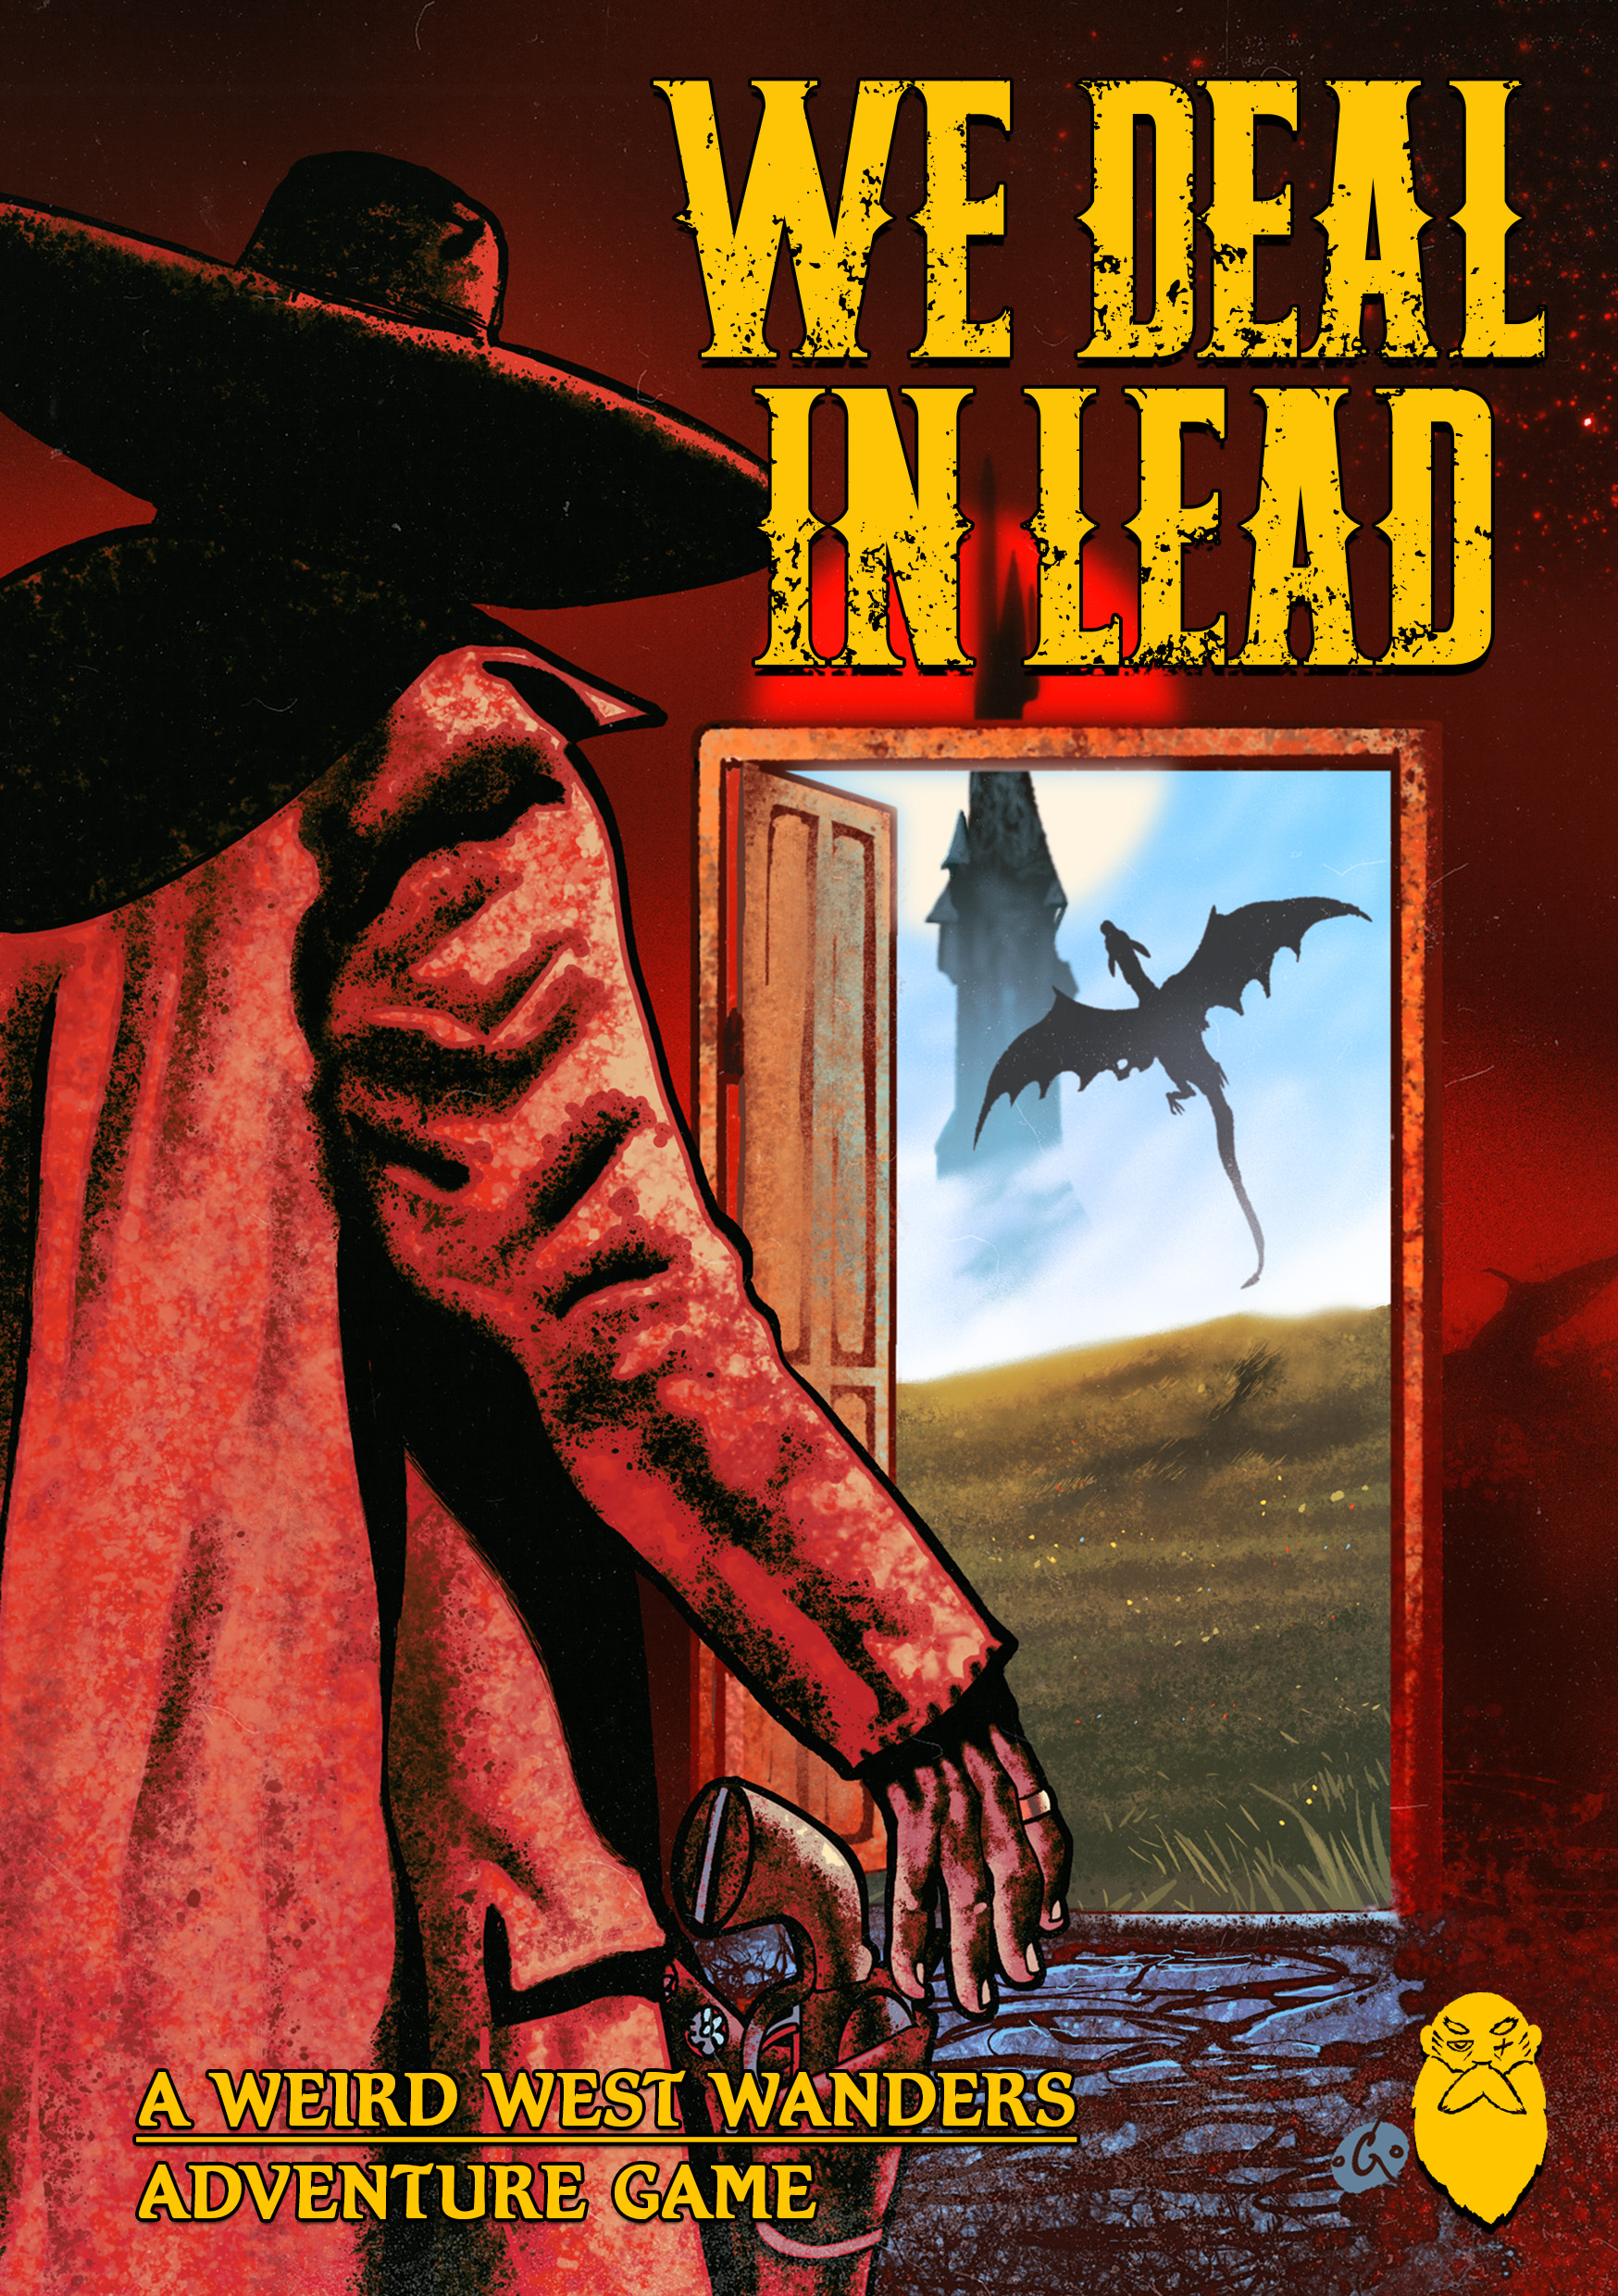 We Deal in Lead is Now Available! Cover